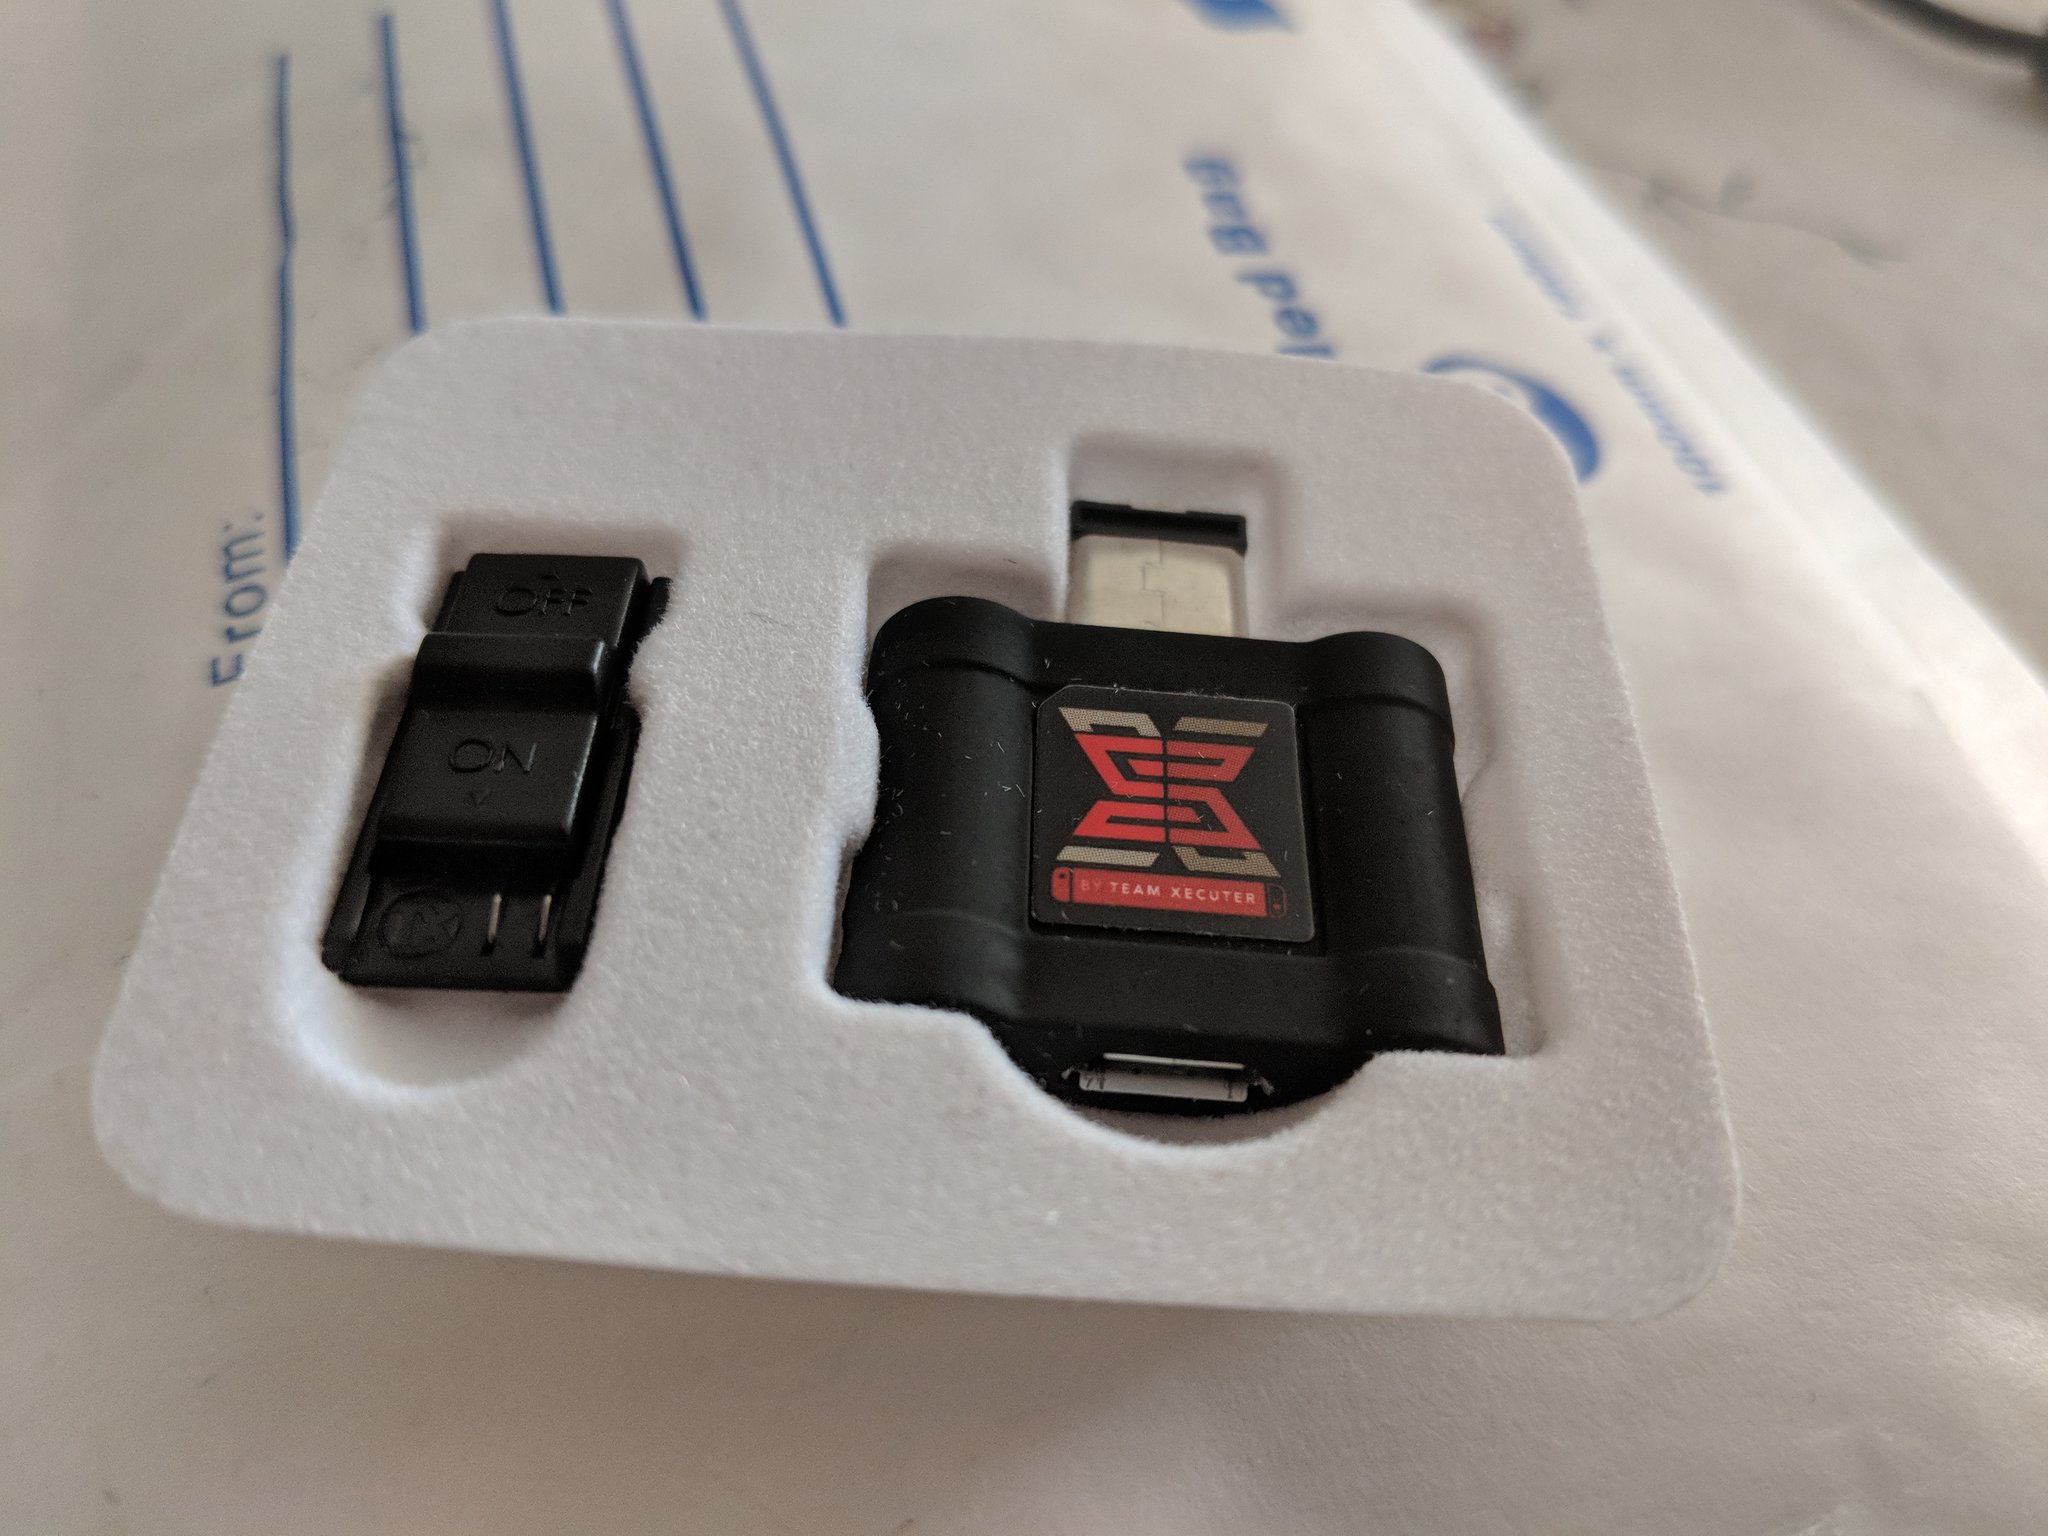 XeXSolutions on X: "Xecuter SX Pro has arrived! #switchhomebrew #sxpro  https://t.co/CceuHHBRU9" / X